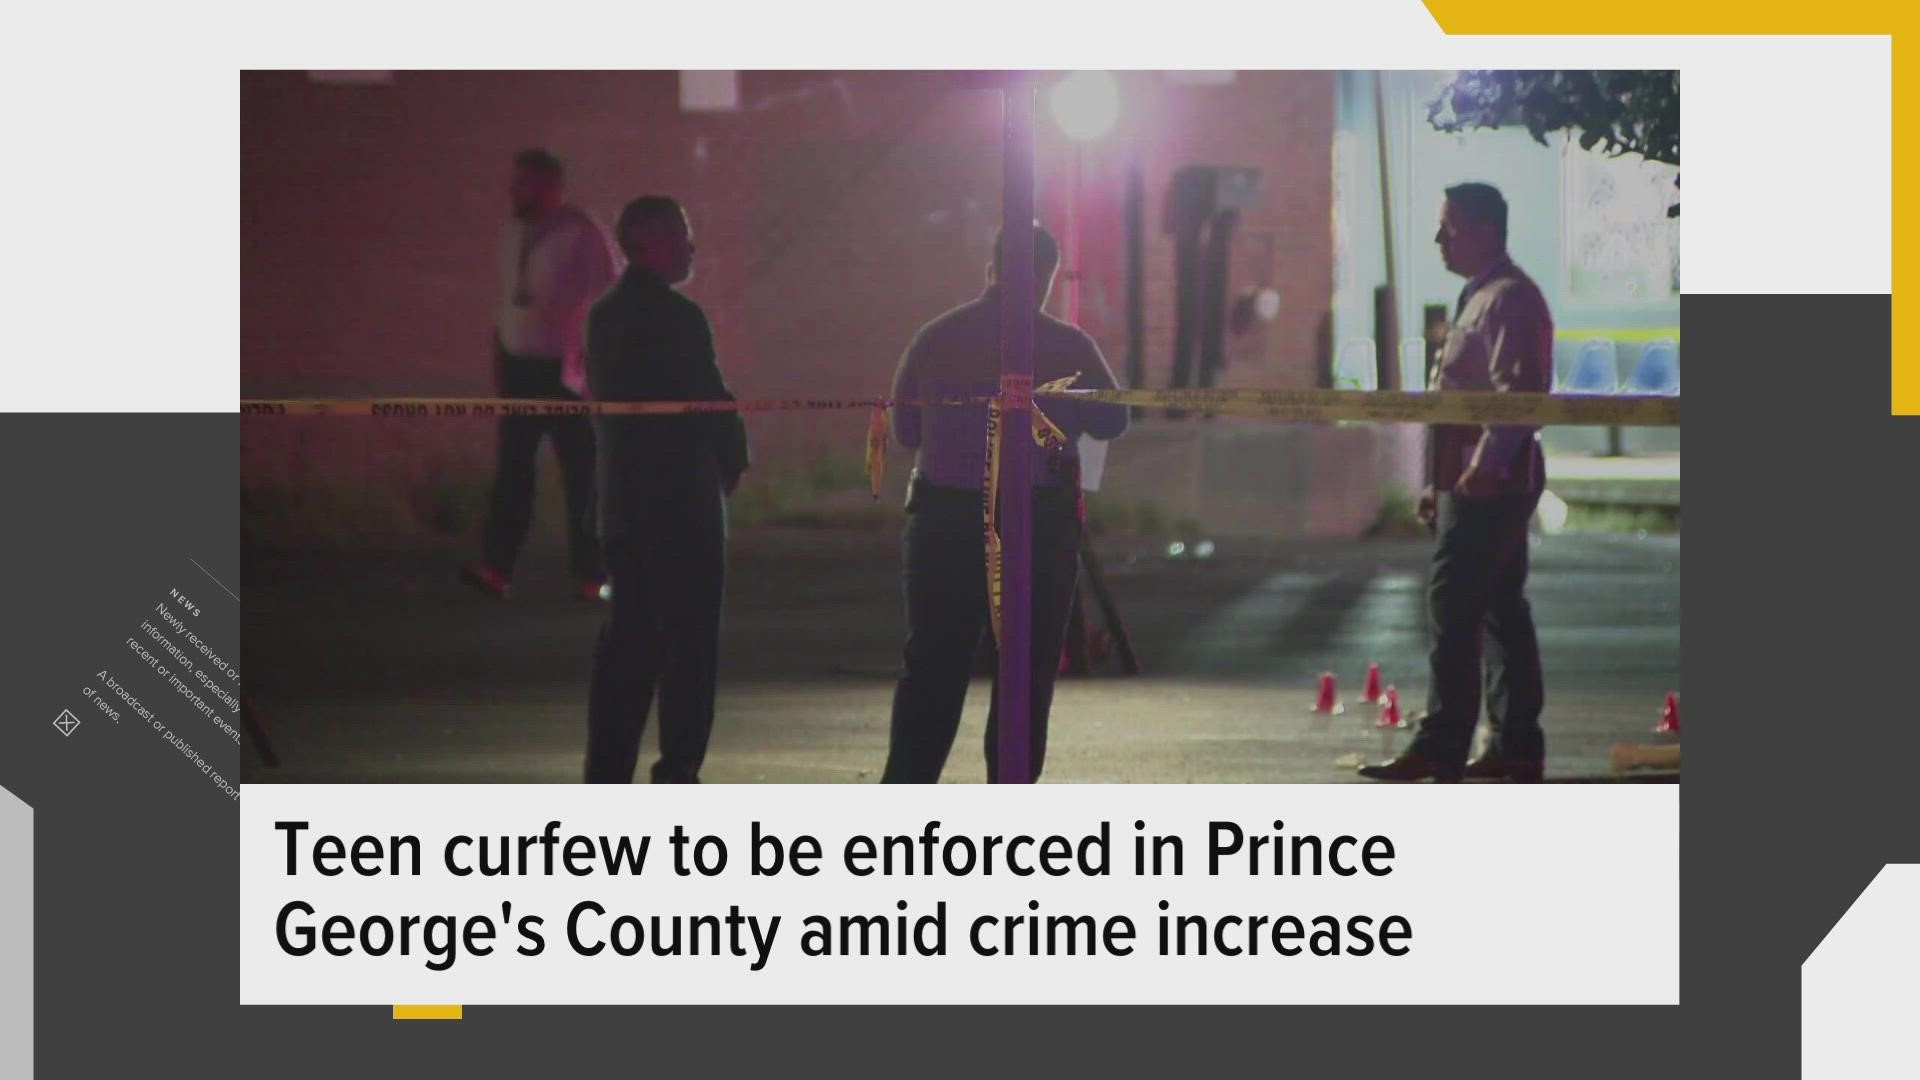 A curfew for teenagers is to be enforced in Prince George's County amid crime increase.